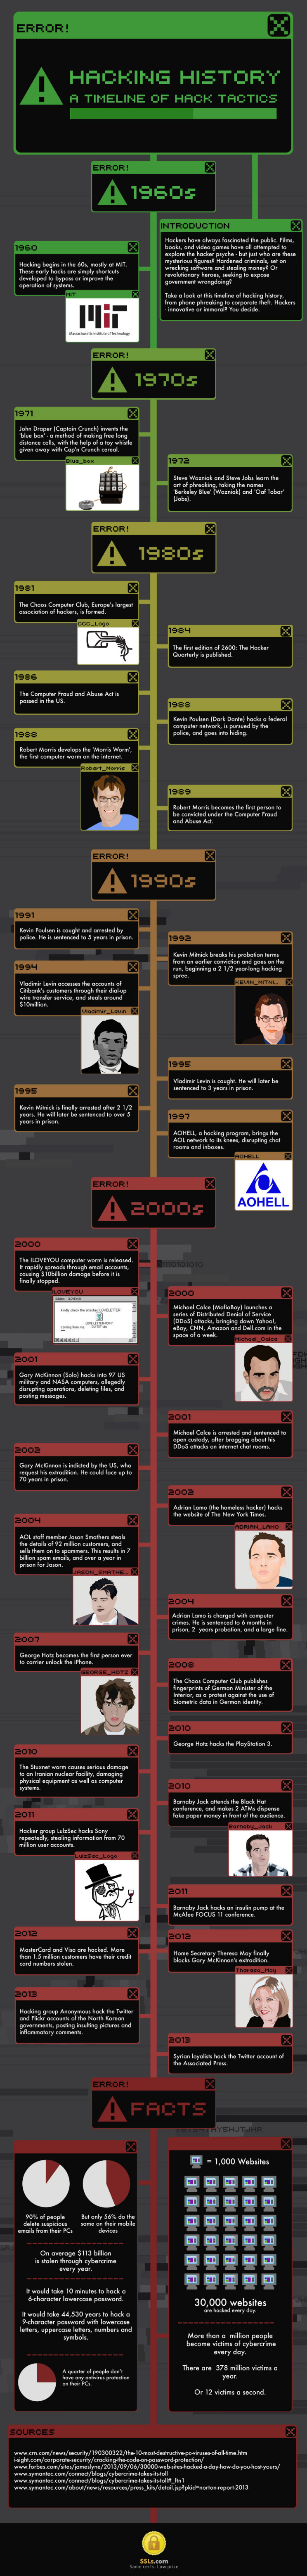 The-Hacking-History-Timeline-Infographic